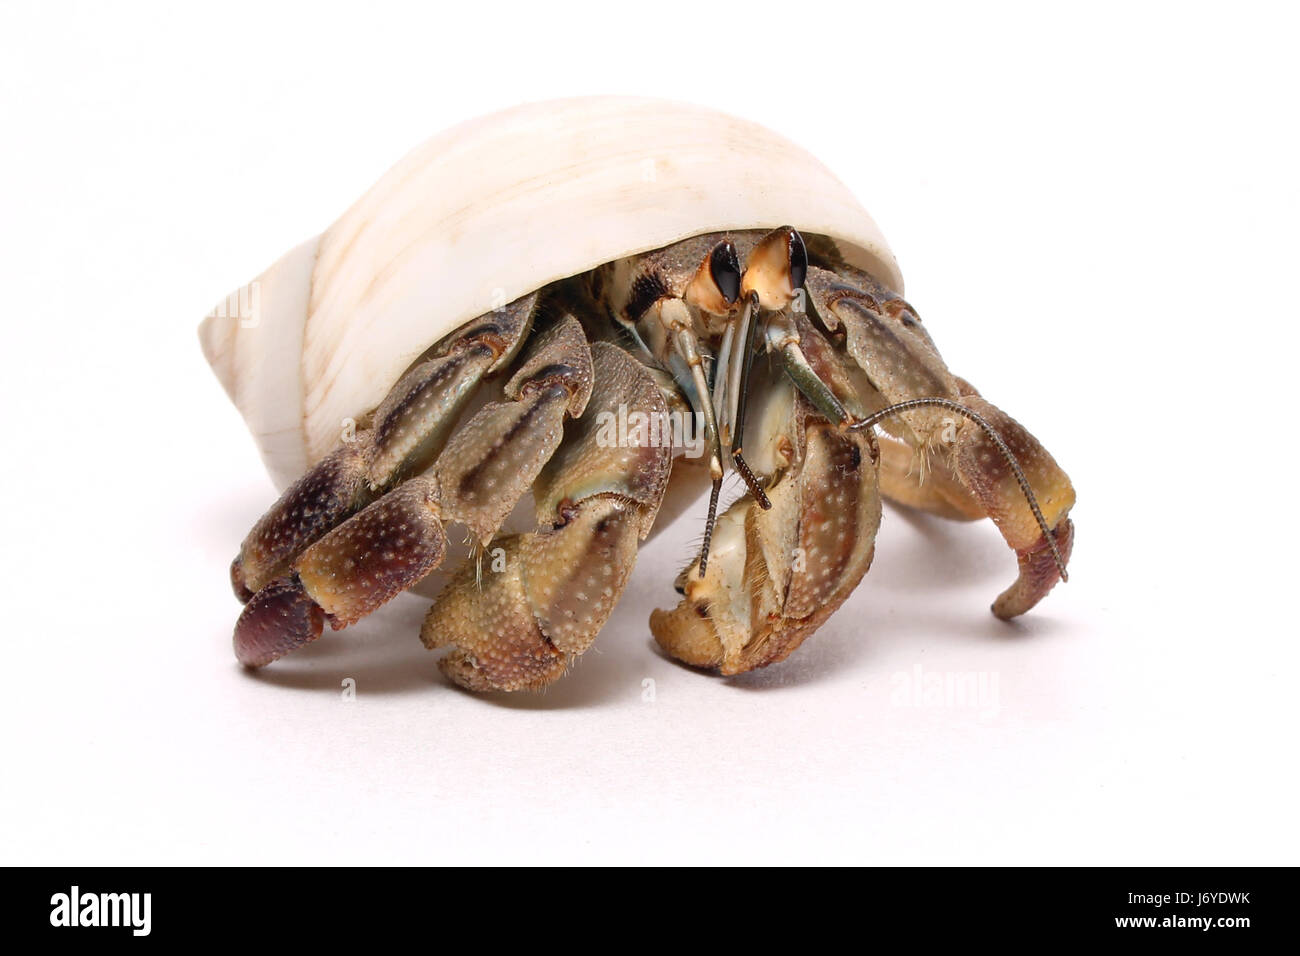 Macro Macro close-up admission vue en gros animal animaux coquillage crabe Banque D'Images